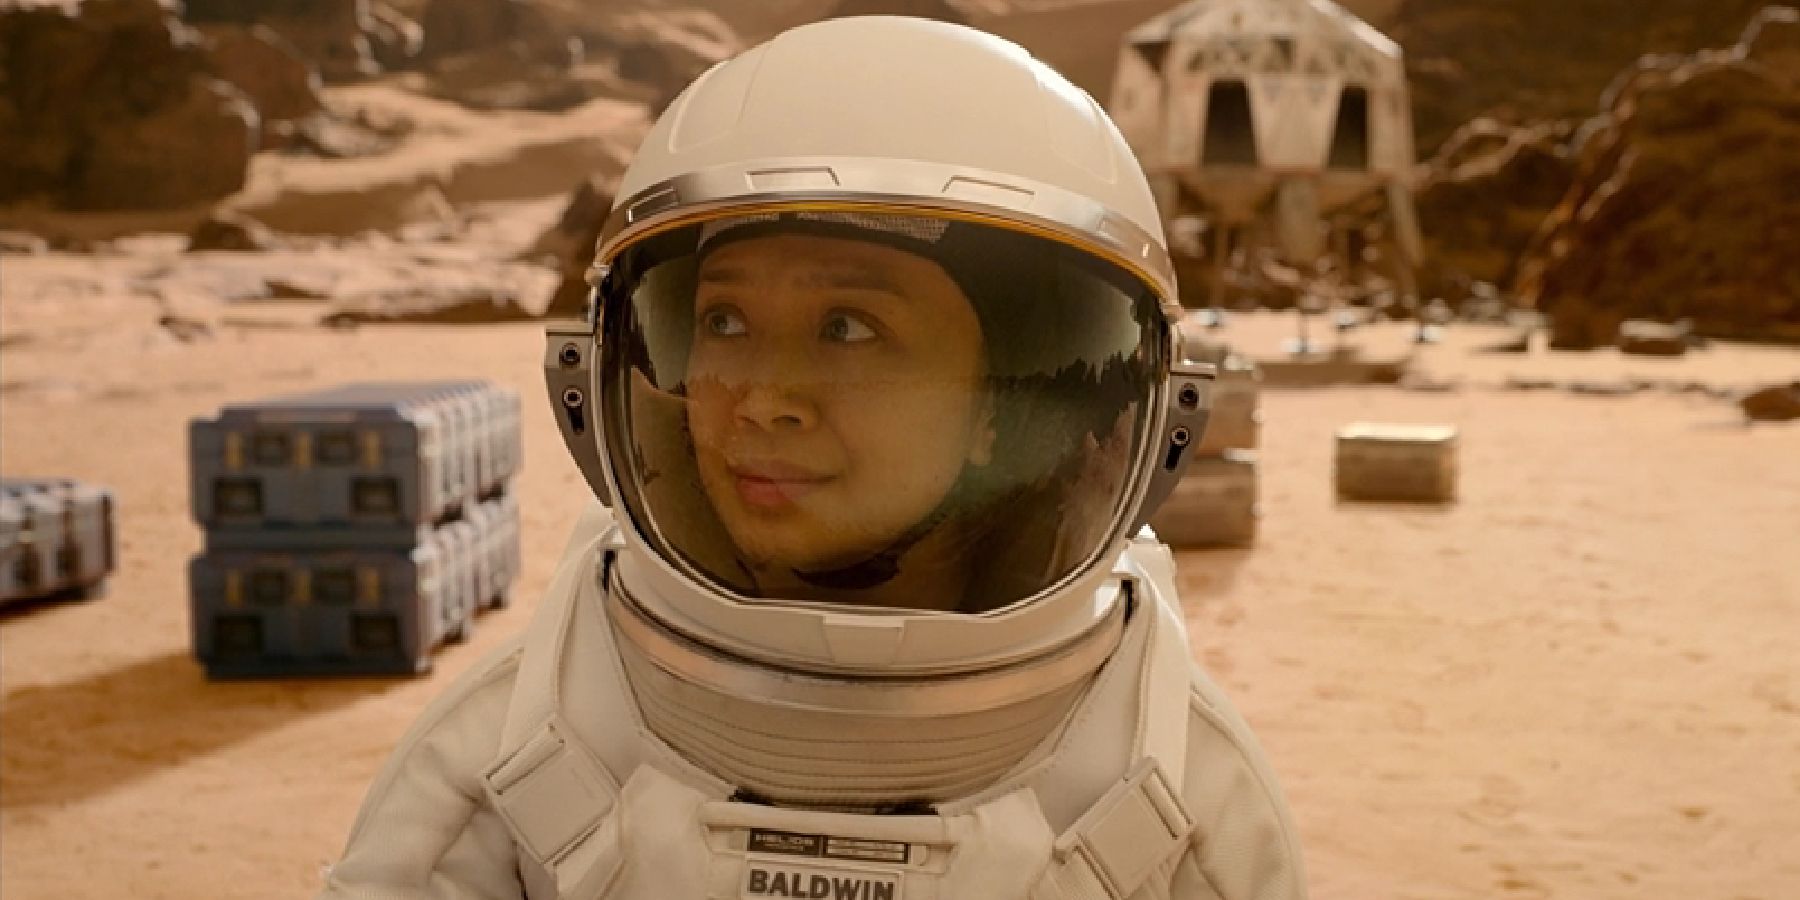 Kelly in a space suit on the Mars surface